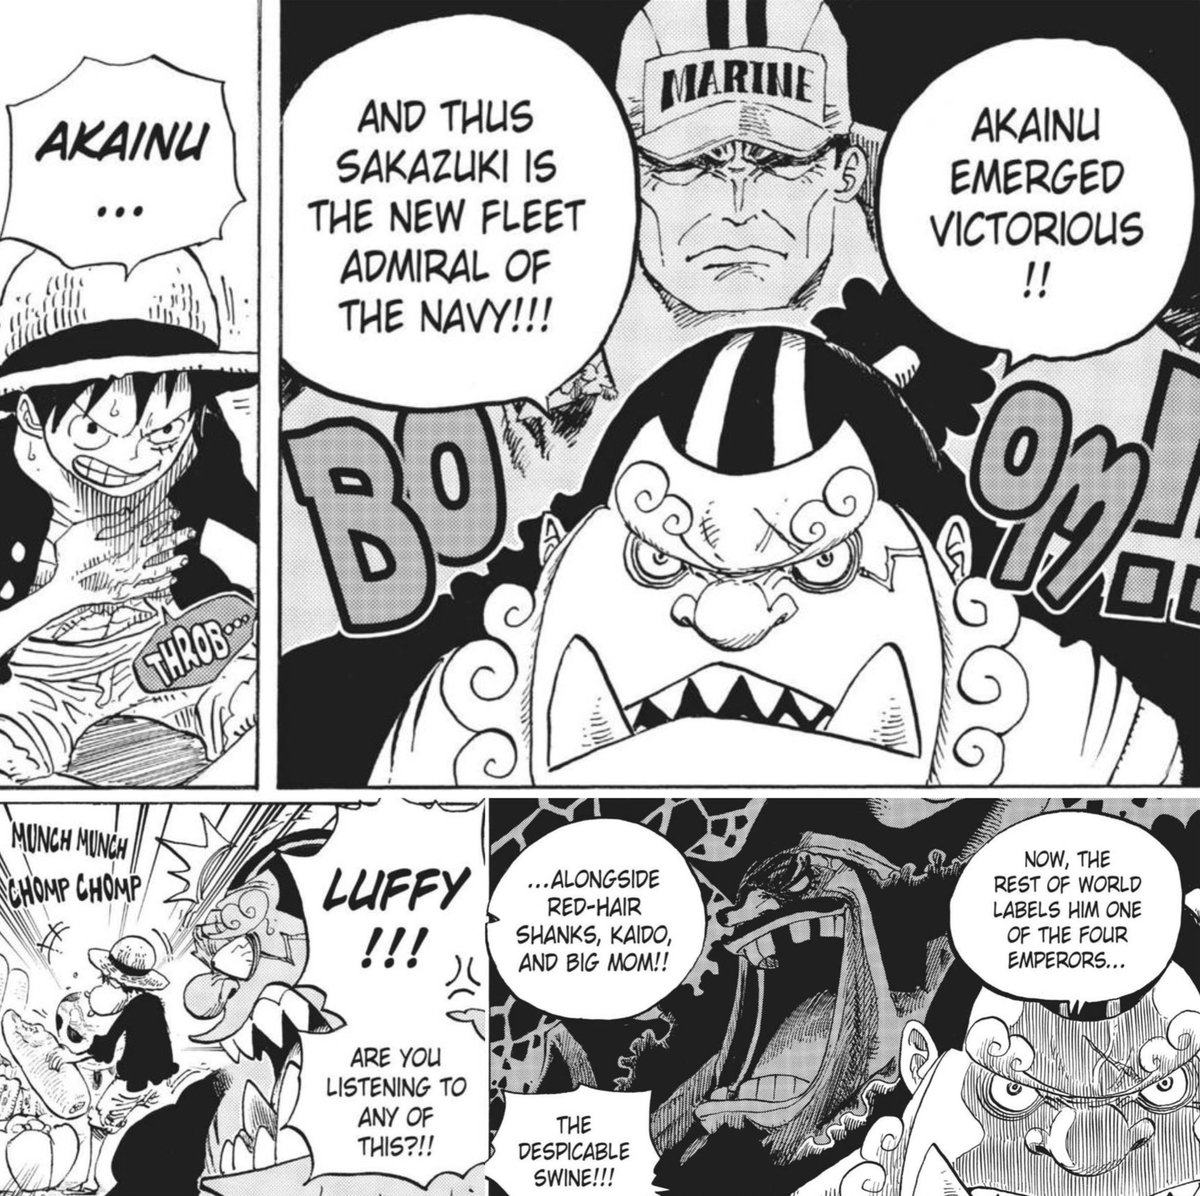 Luffy reacting to Akainu becoming Fleet Admiral vs Luffy reacting to Blackbeard becoming a Yonko and getting compared to Shanks, Kaido, and Big Mom: